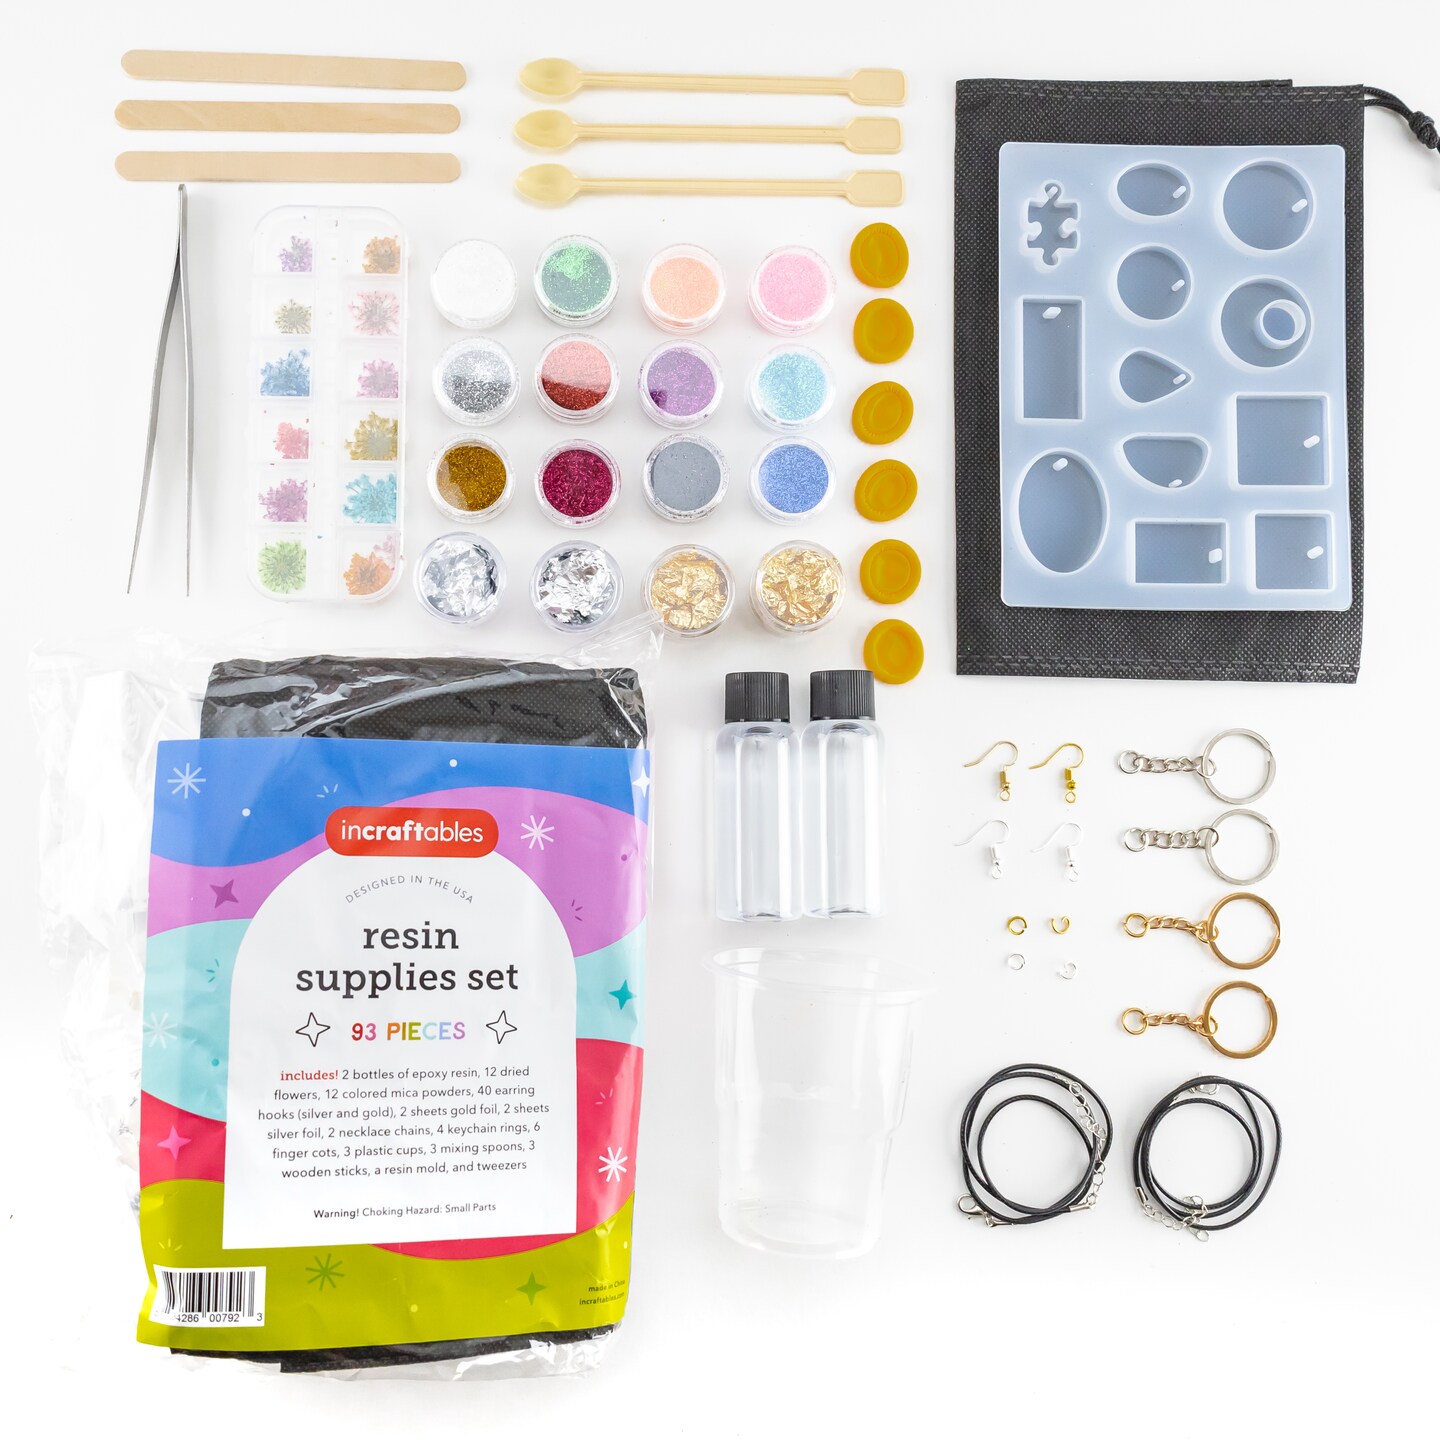 Incraftables Epoxy Resin Kit for Beginners. Resin Supplies set for Kids &#x26; Adults. Epoxy Resin Kit with mold, Epoxy Bottles, Dried Flowers, Mica powders, Foils, measuring cups &#x26; Jewelry Making Supplies